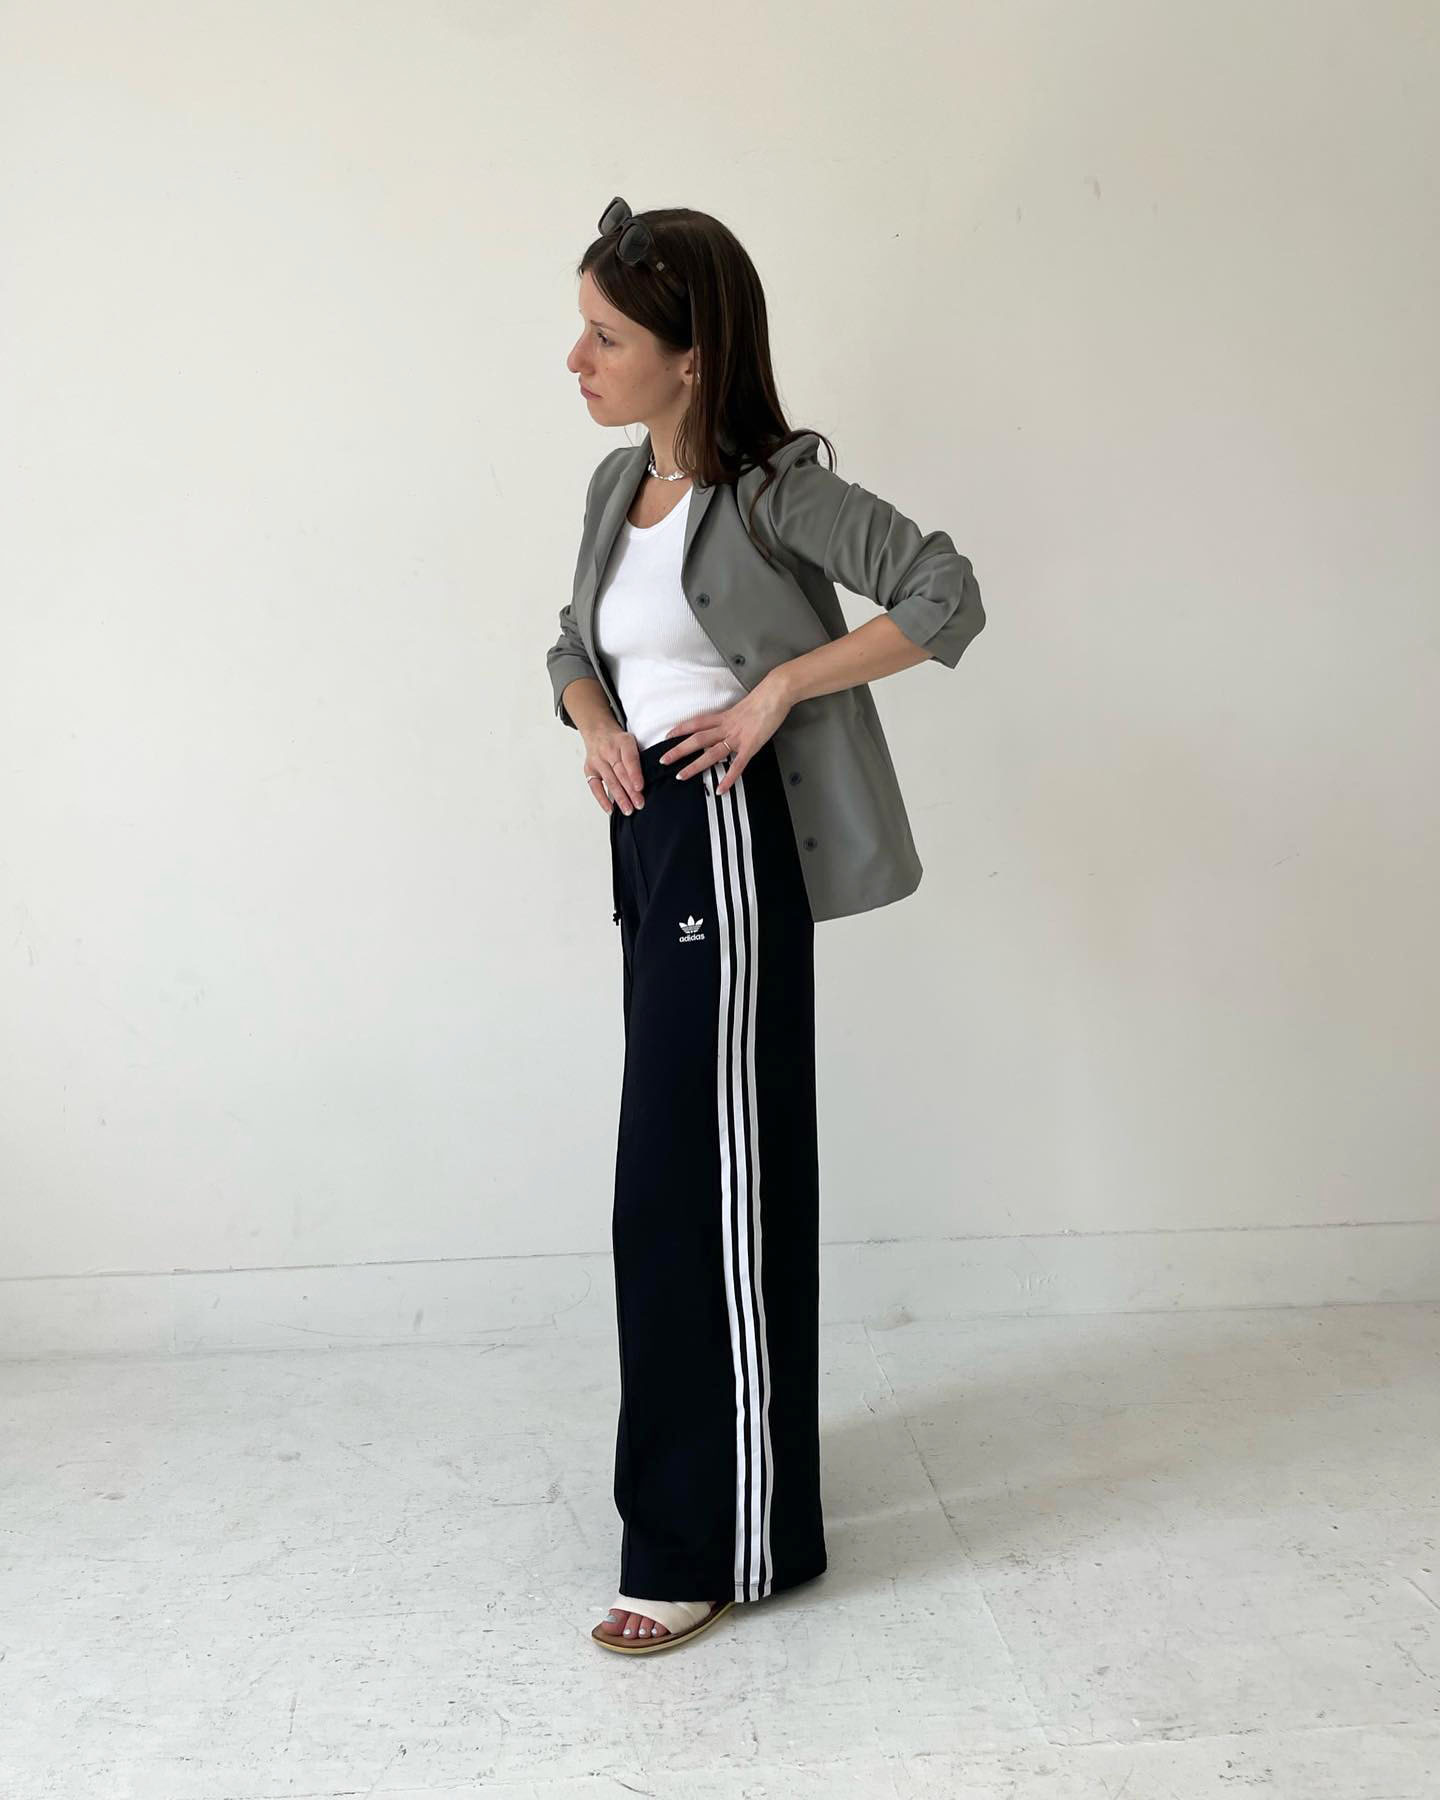 fashion influencer Laura Reilly poses in a gray blazer, white tank top, Adidas striped track pants, and slide sandals